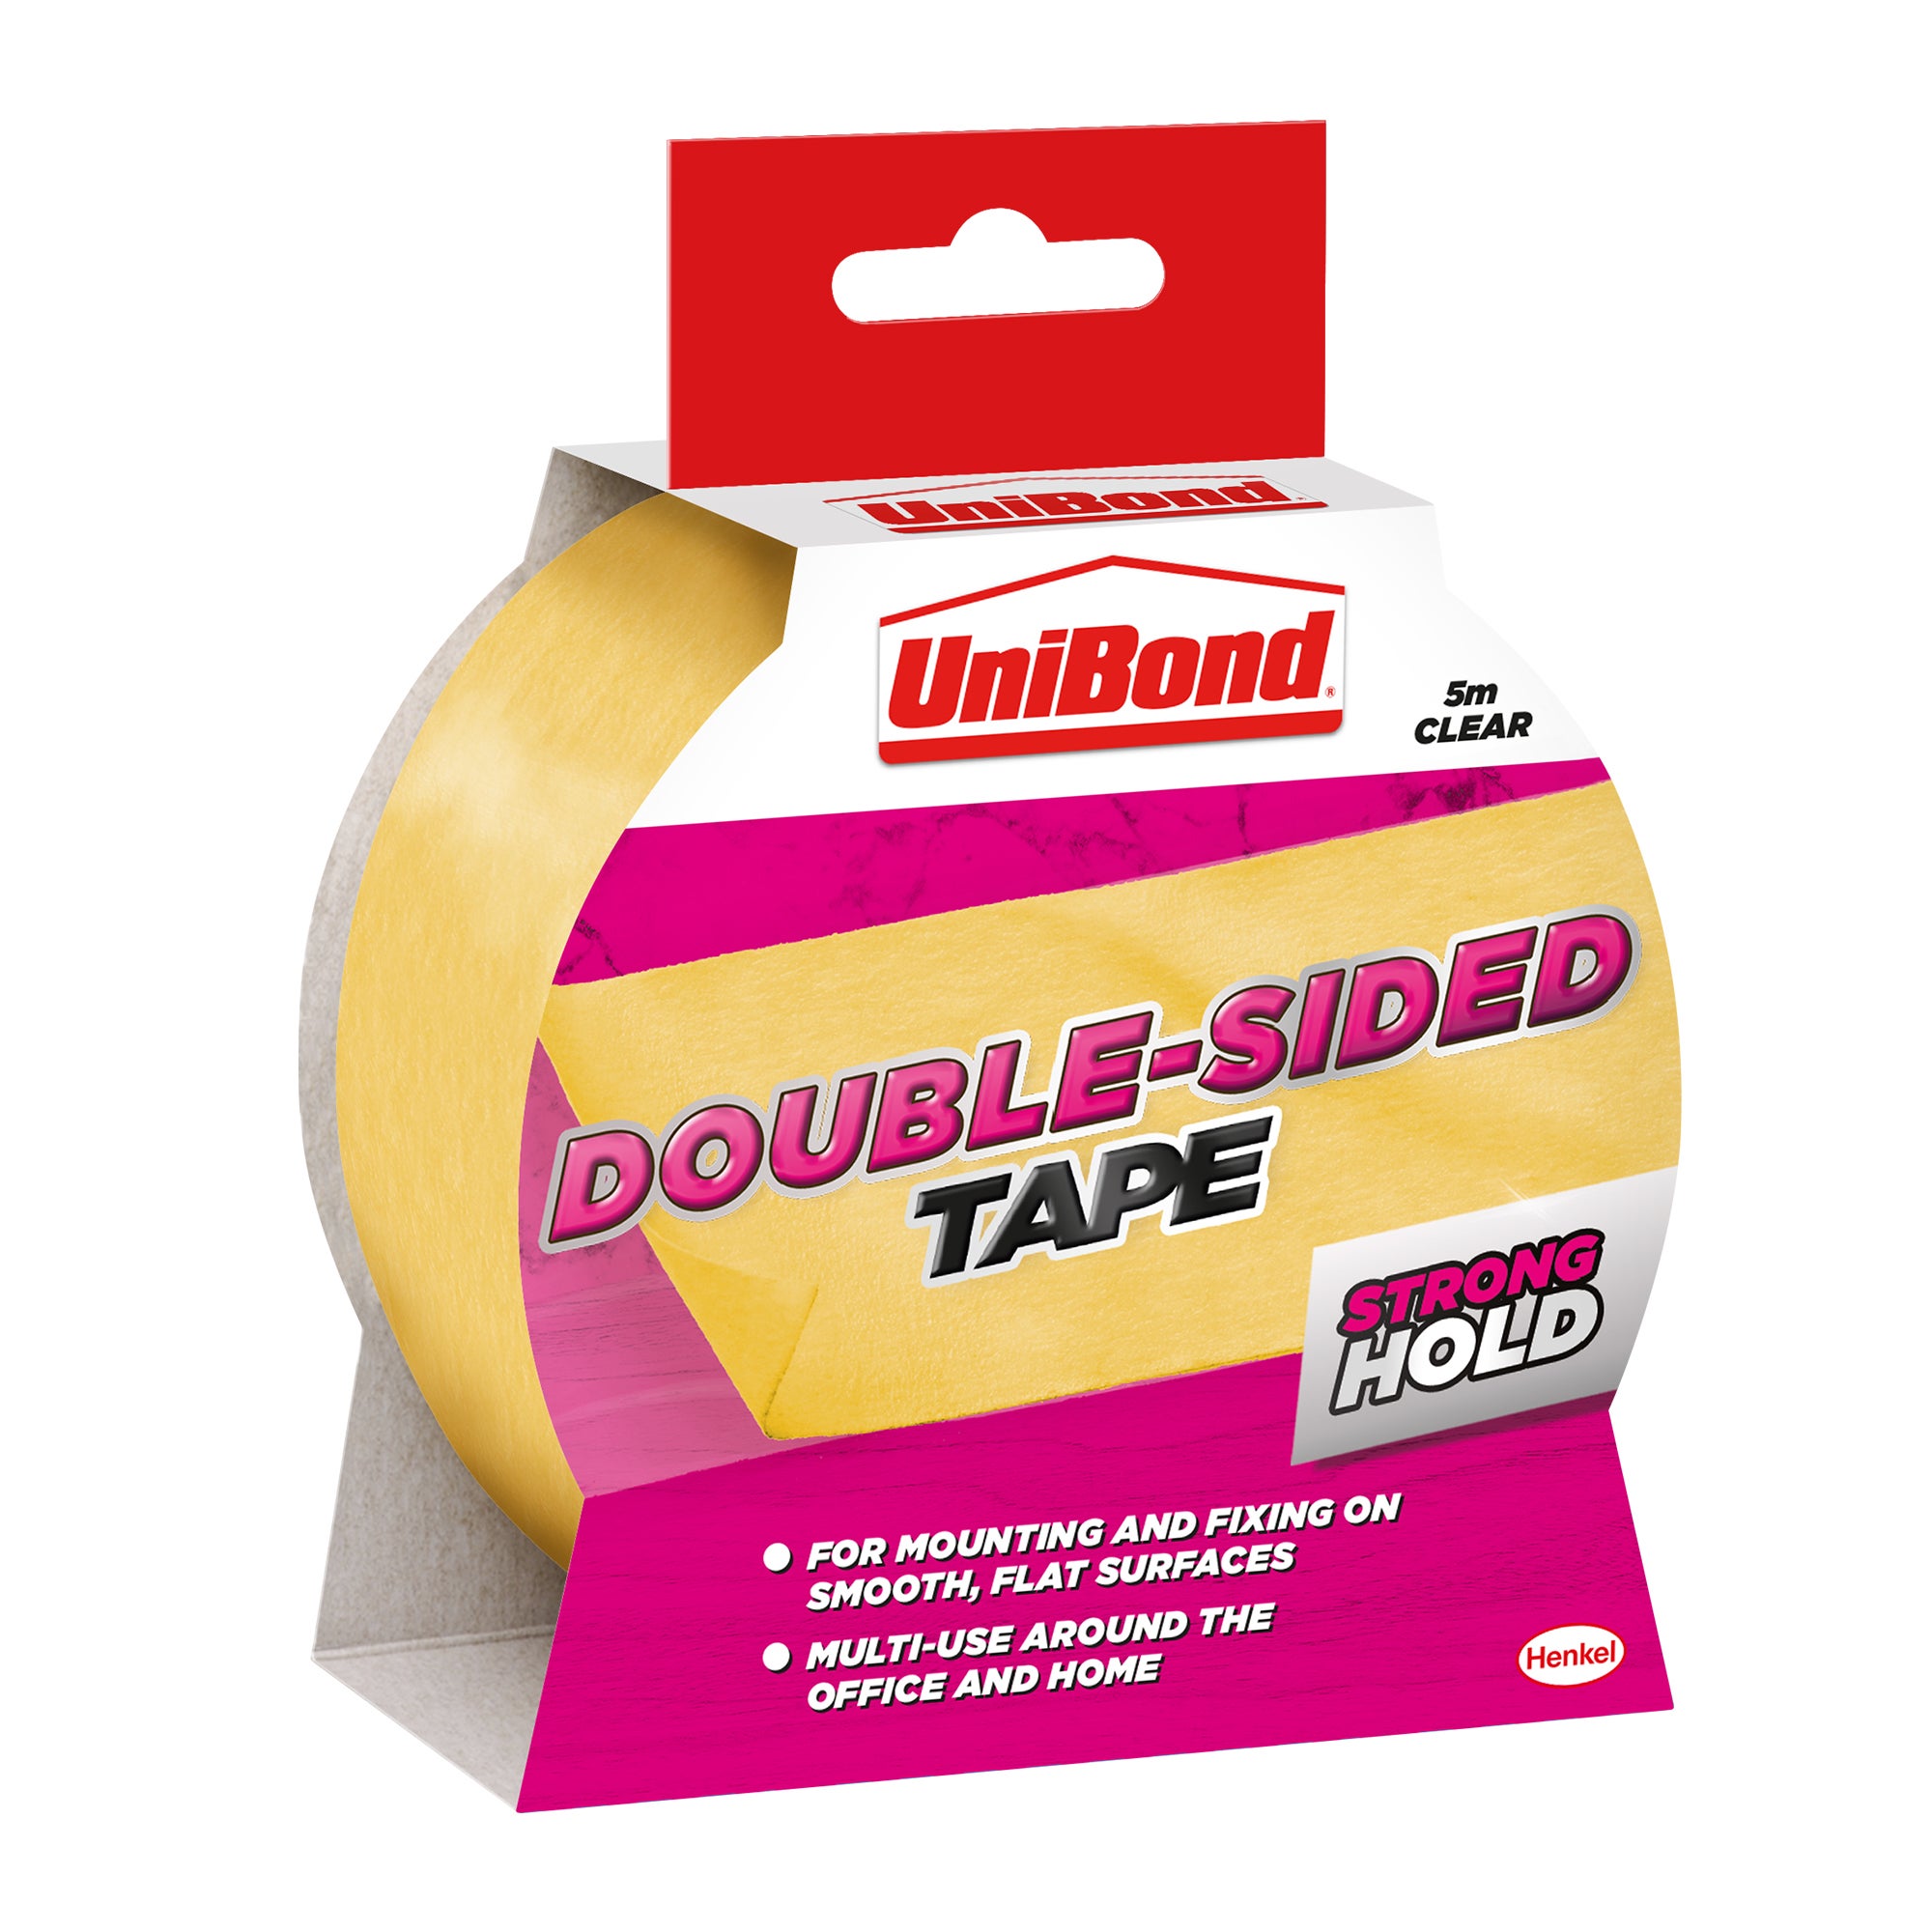 UniBond Double Sided Tape 5m